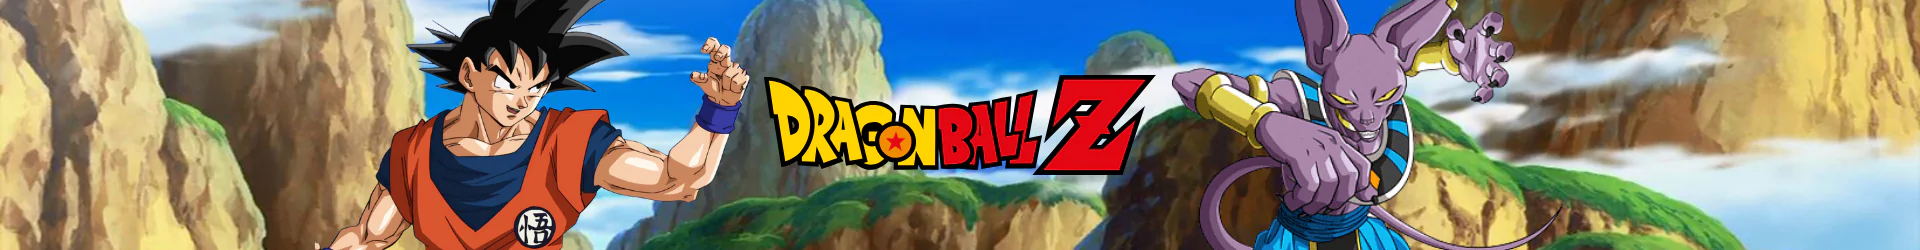 Dragon Ball products banner